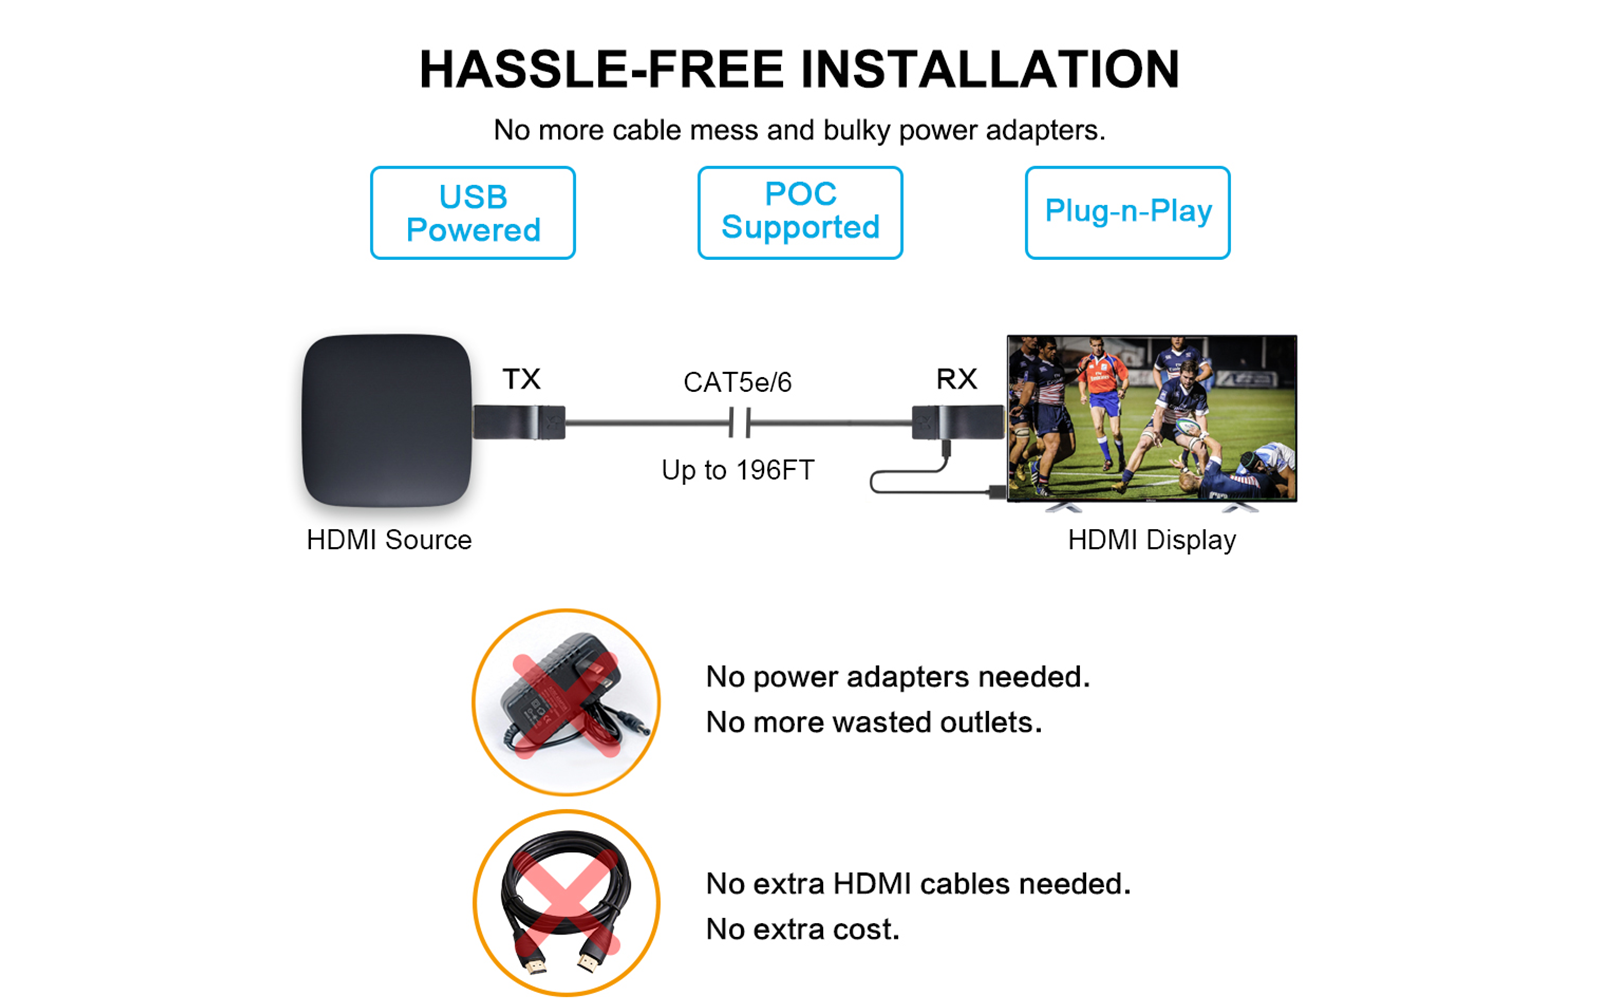 hdmi entension cablefor hassle-free installation